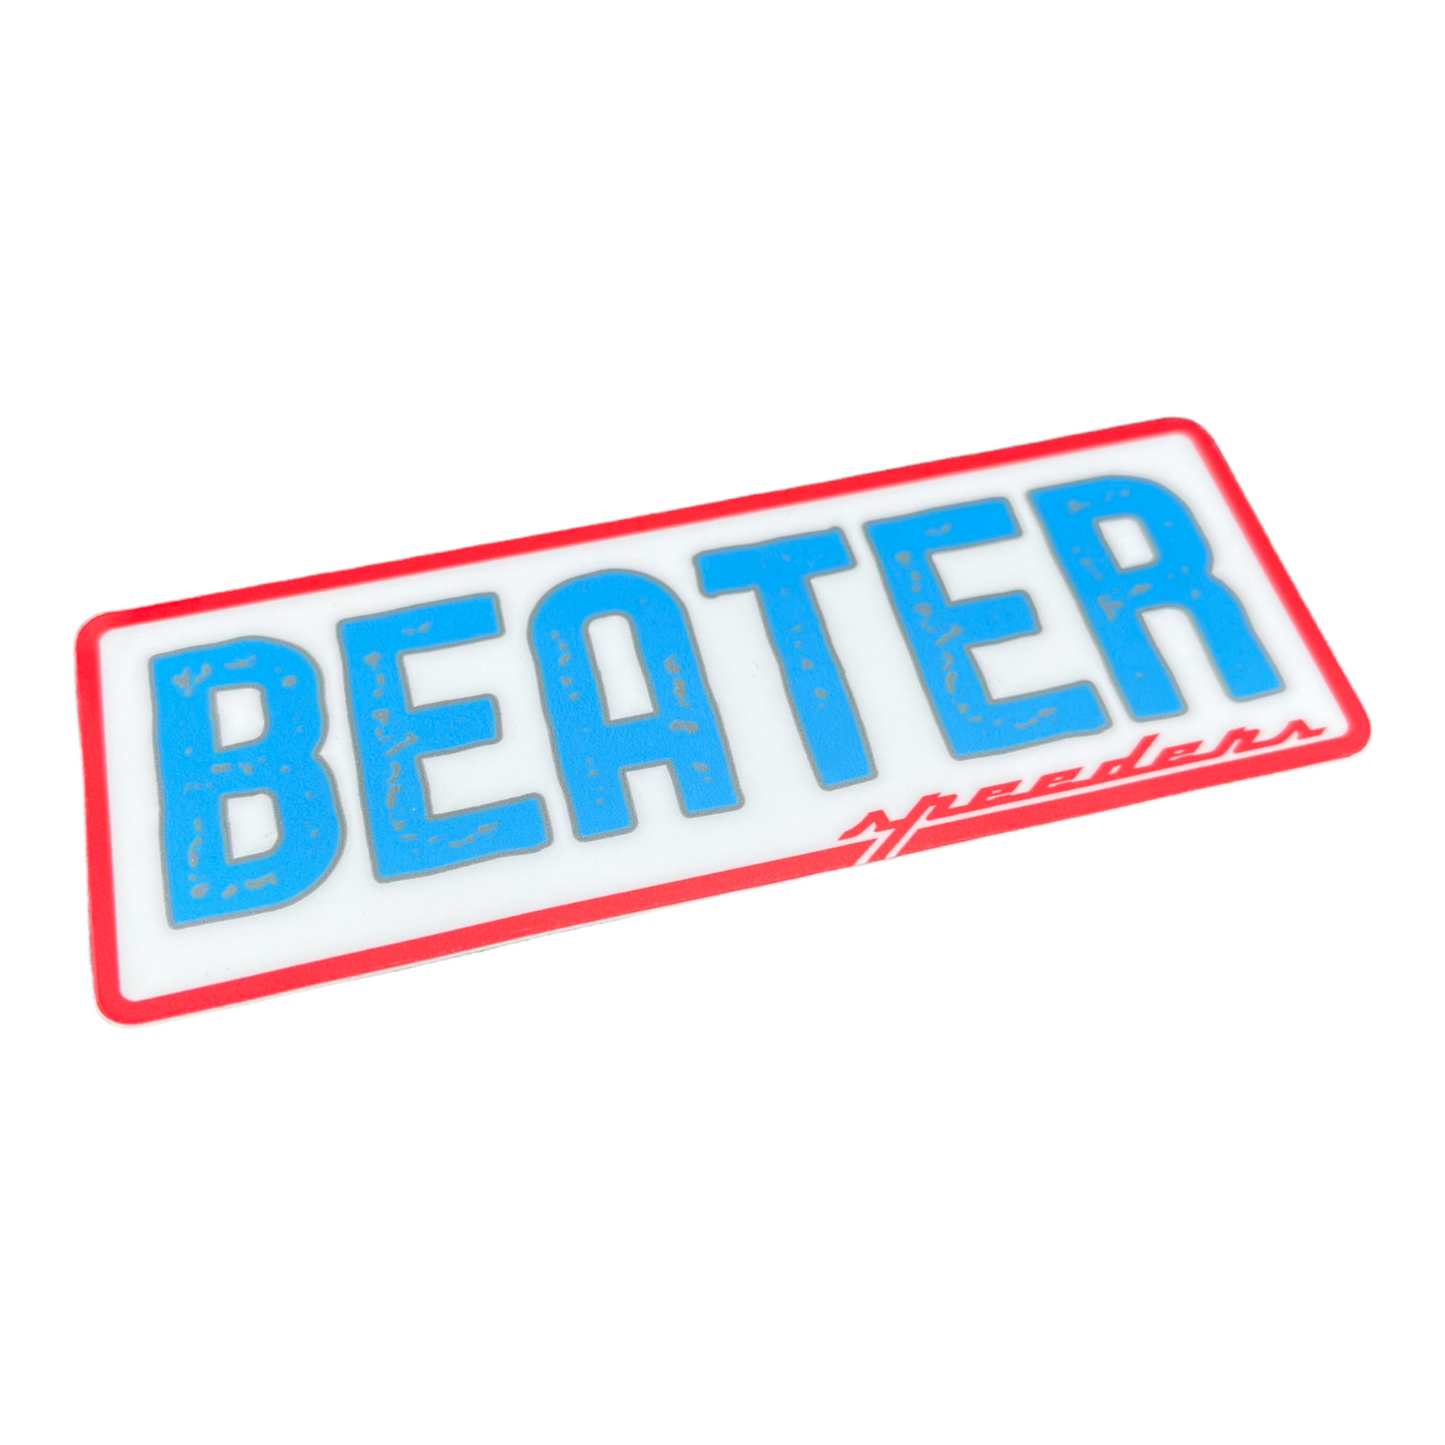 "Beater" Automotive Sticker (Red, White, and Blue)